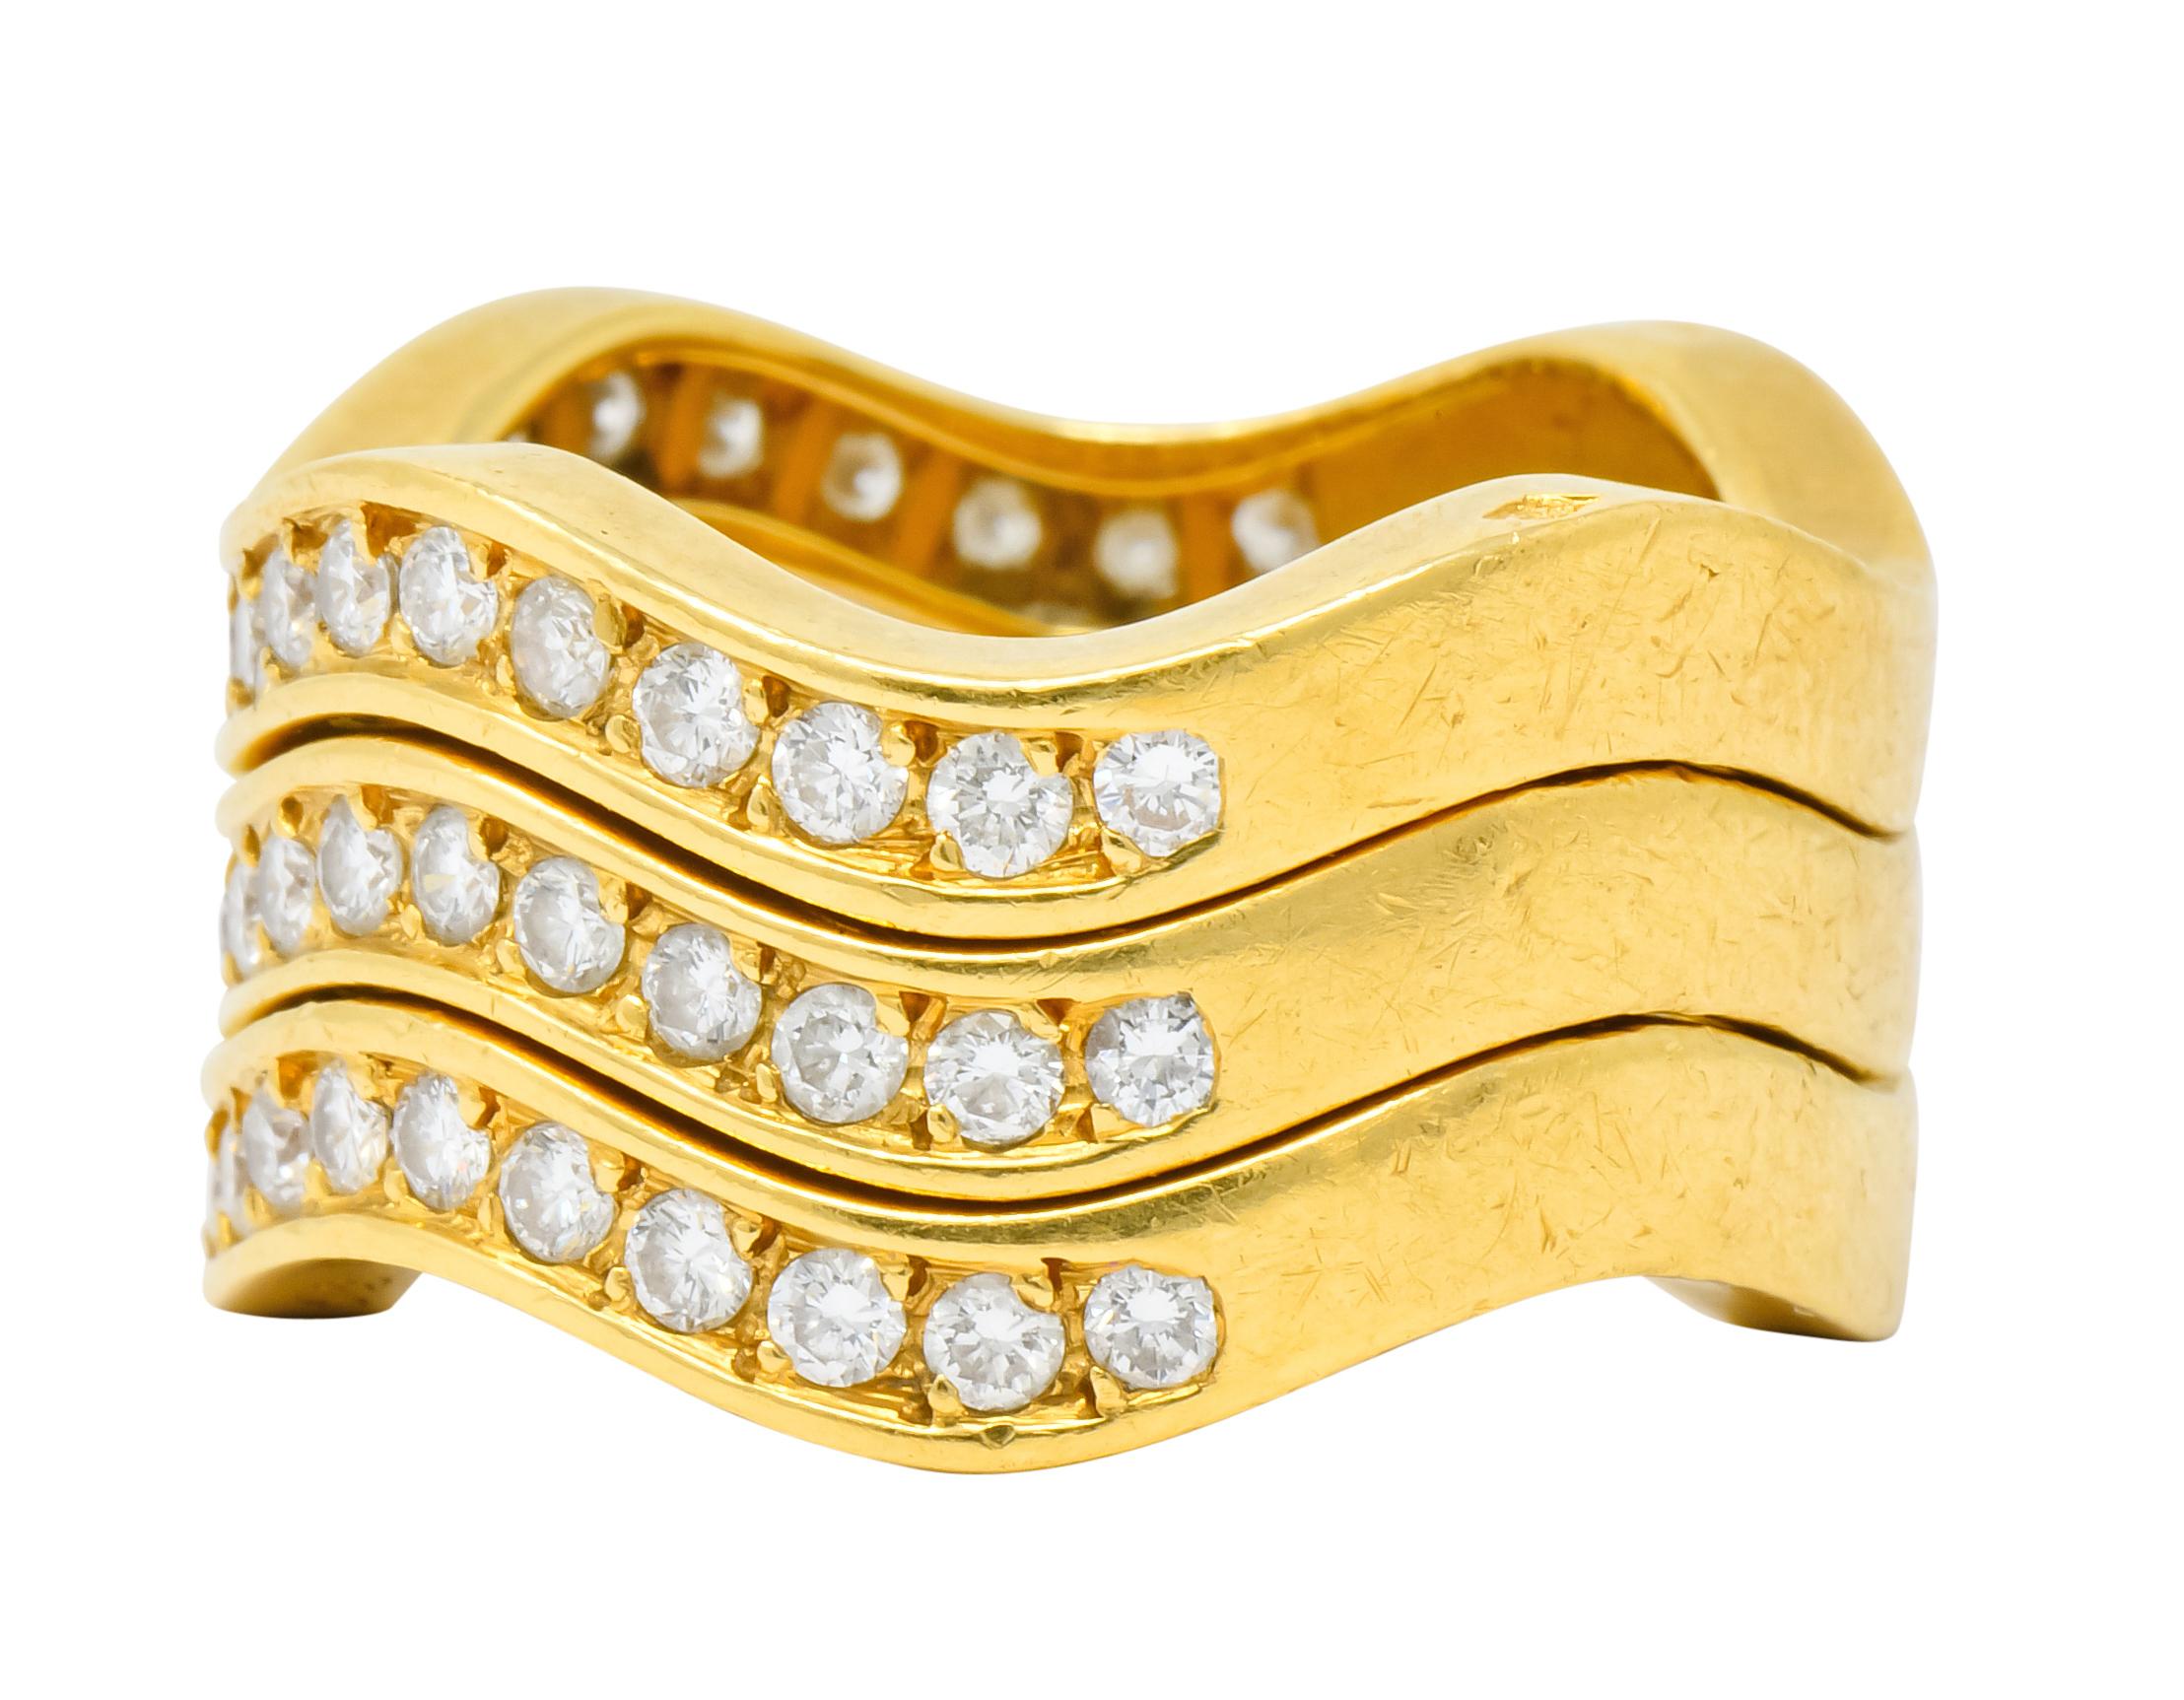 Contemporary French Cartier 1.56 Carat Diamond 18 Karat Gold Wave Triple Band Stack Rings